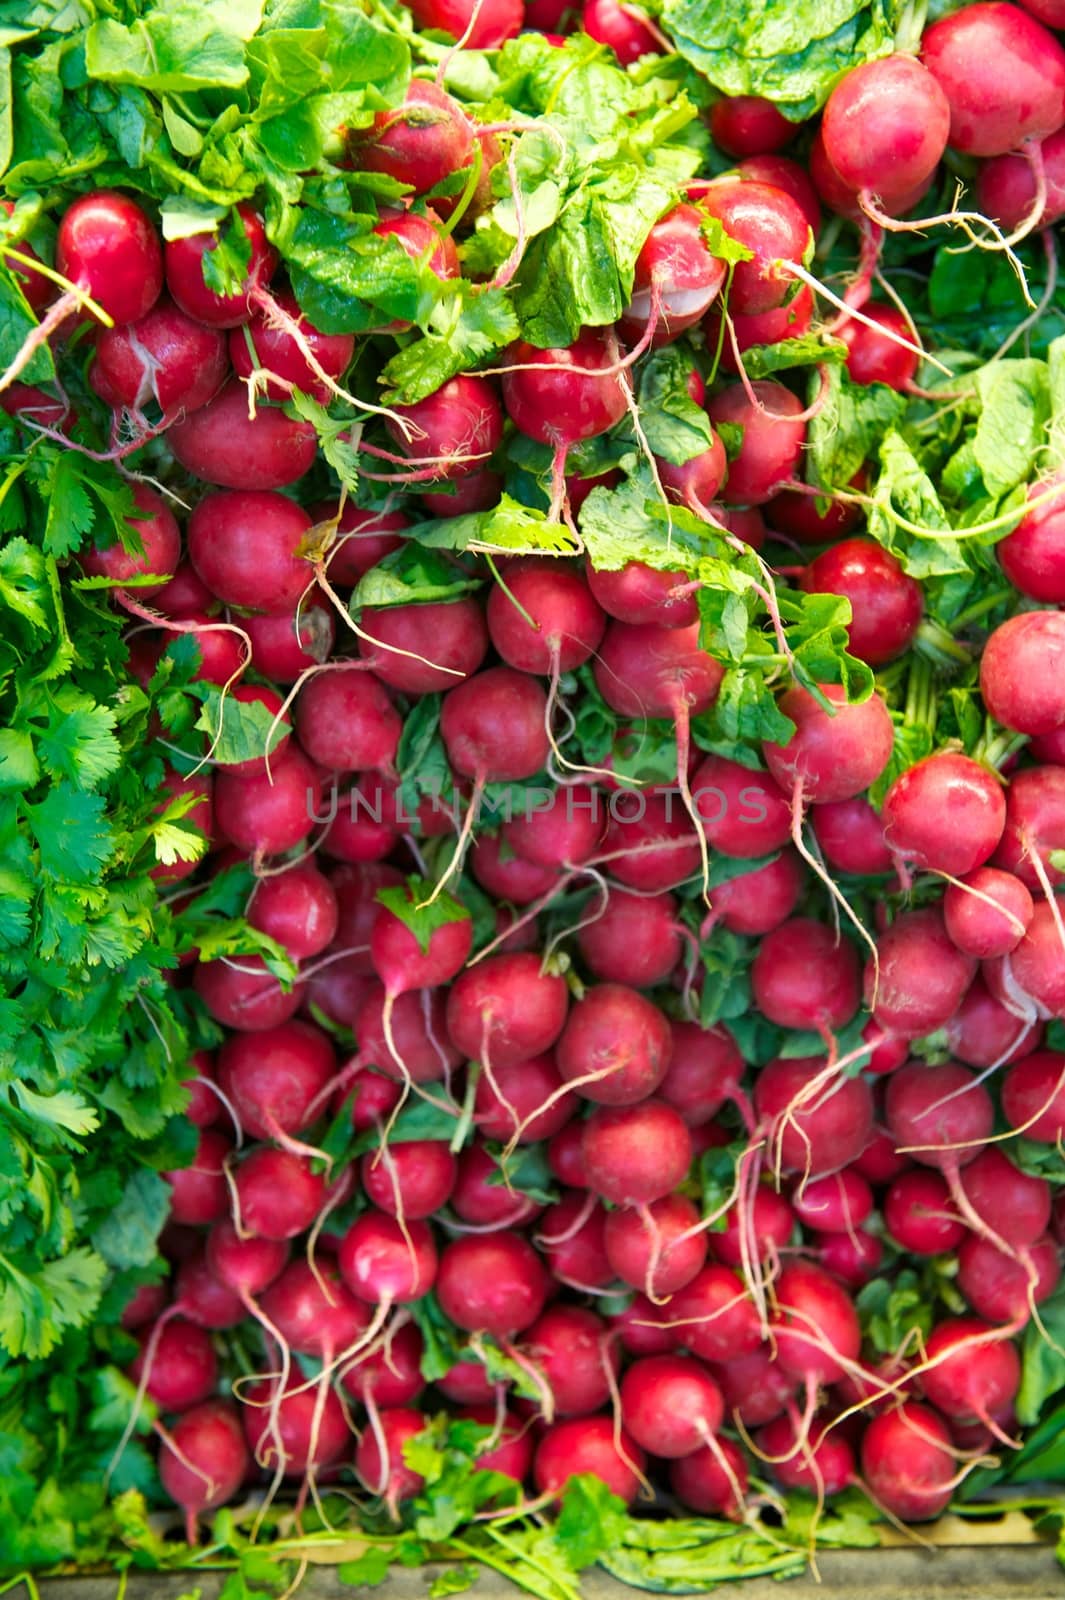 Stack of Red Radishes in a Grocery Store Produce Department by pixelsnap